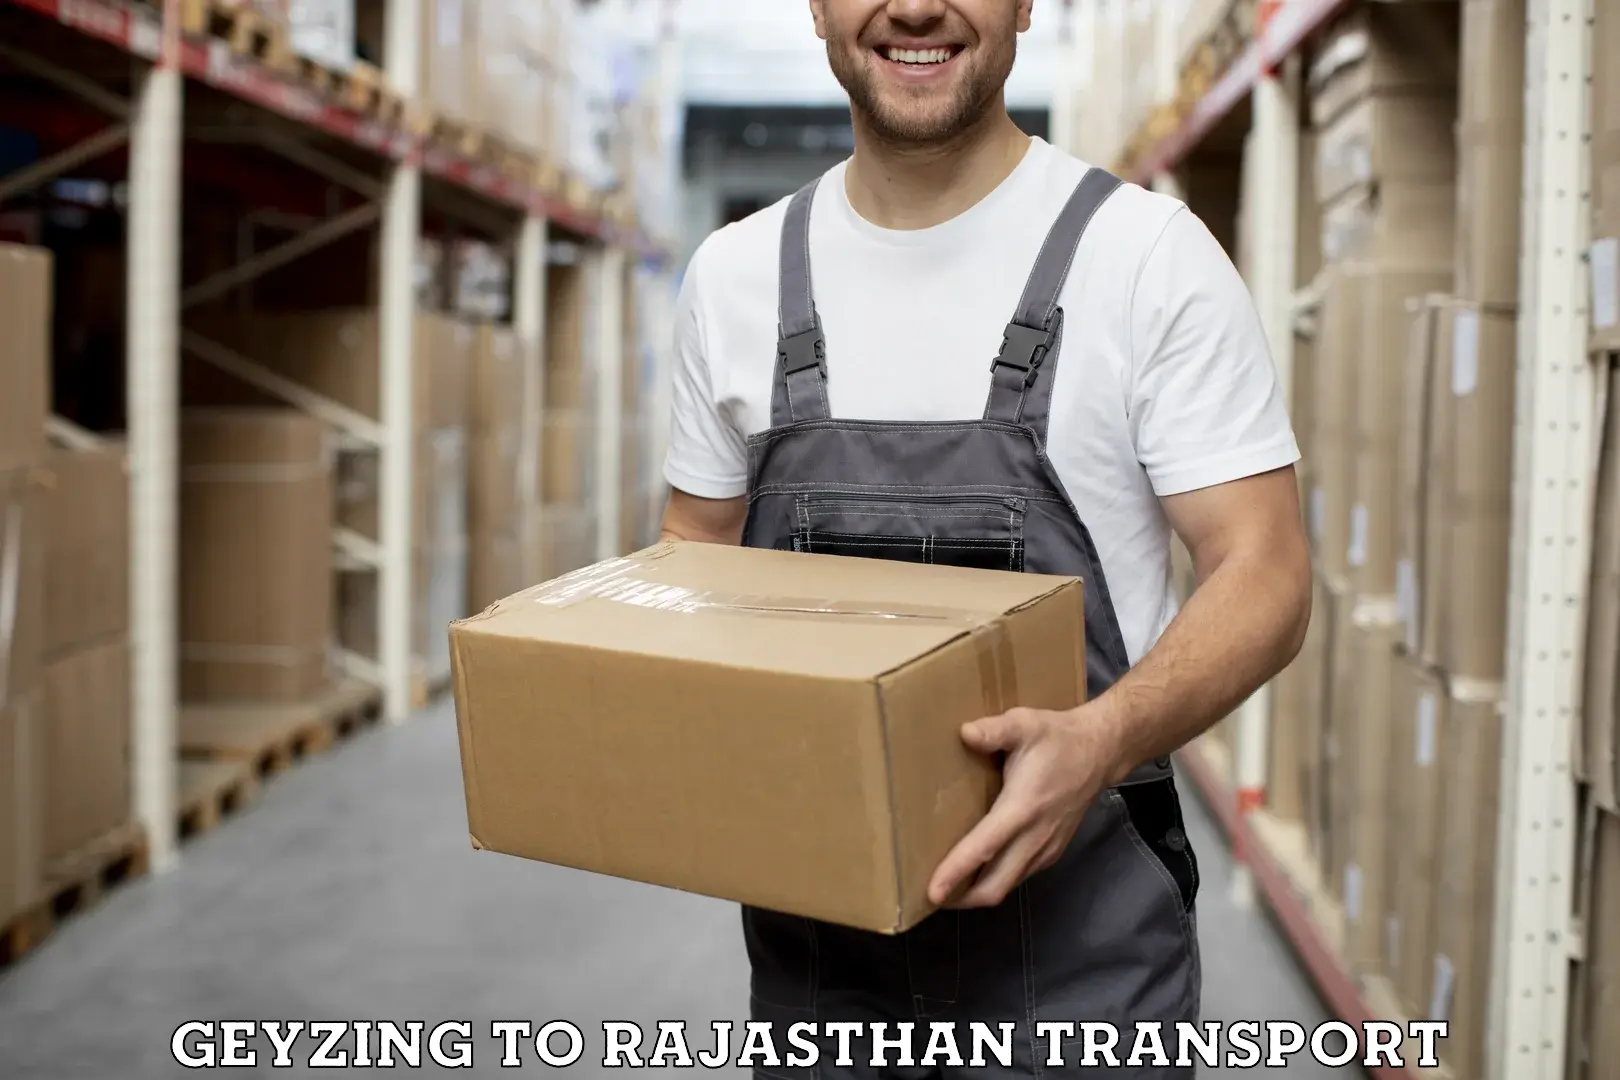 Domestic transport services Geyzing to Rajasthan